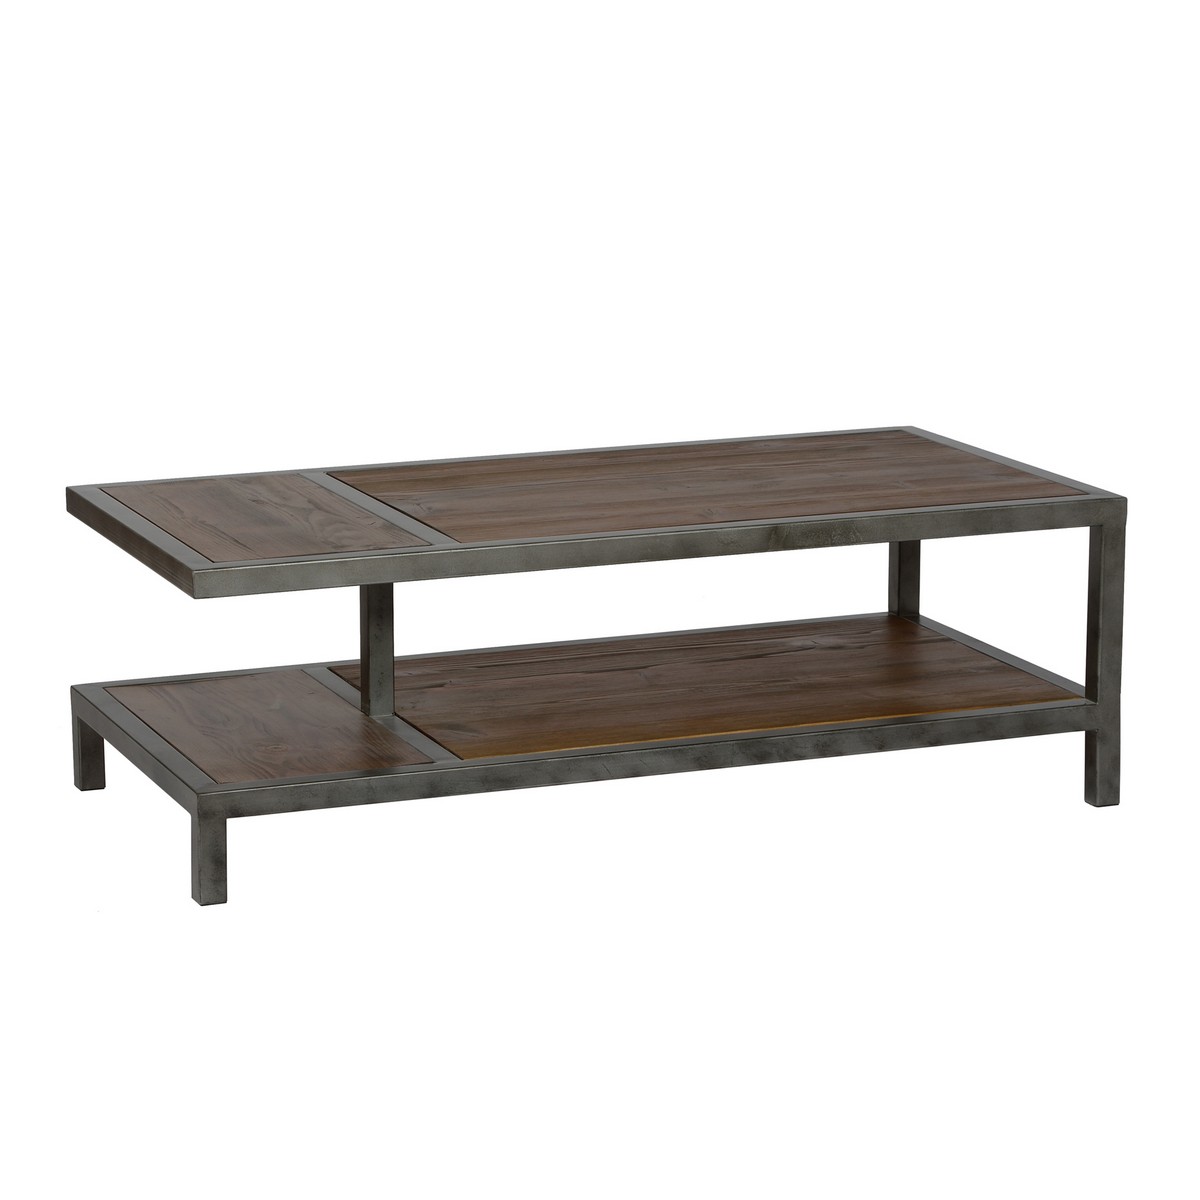 Armen Living Maxton Coffee Table - Natural